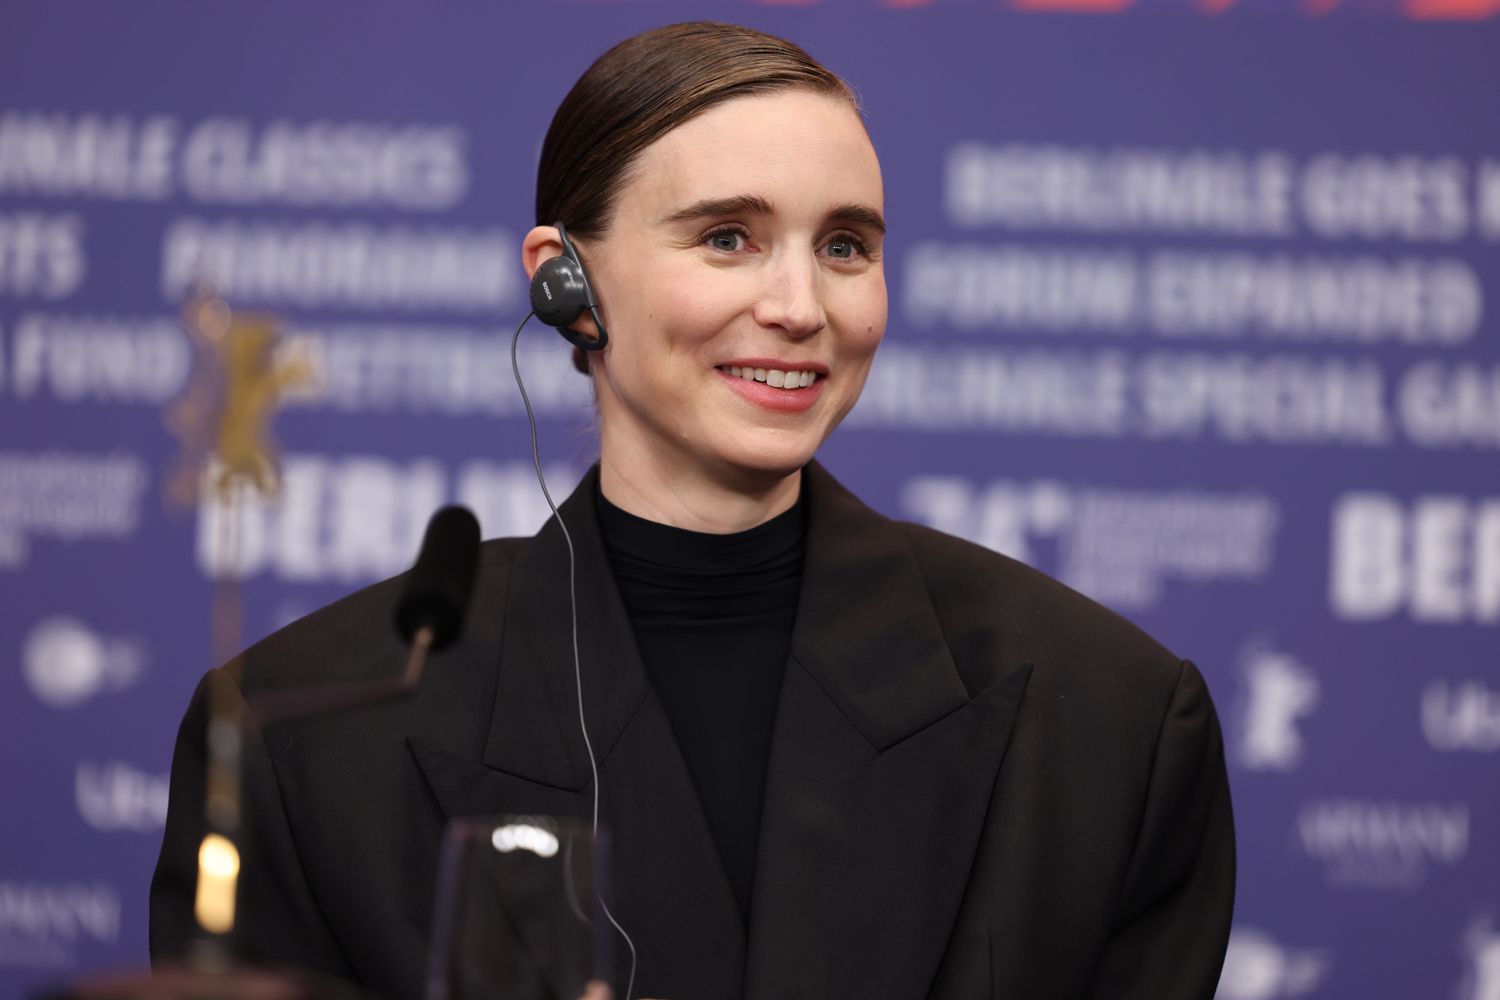 Rooney Mara, actress, at the press conference for the film "La Cocina" 